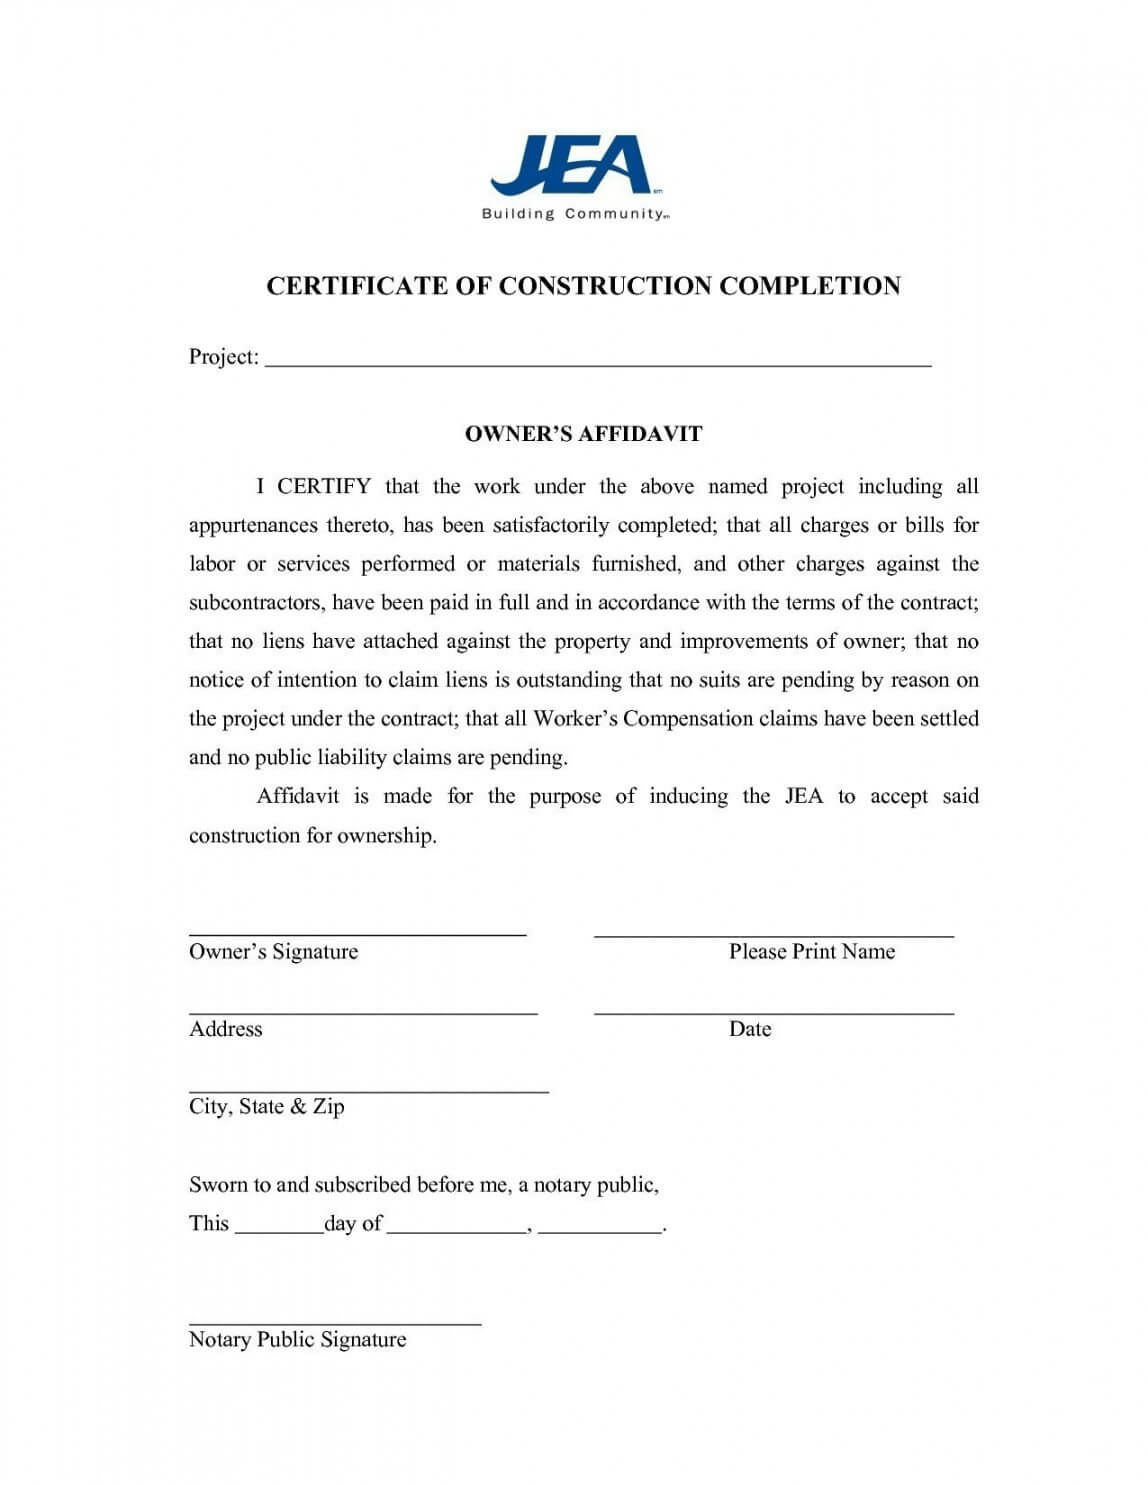 Free Project Completion Certificate Rmat In Word Template Within Construction Certificate Of Completion Template